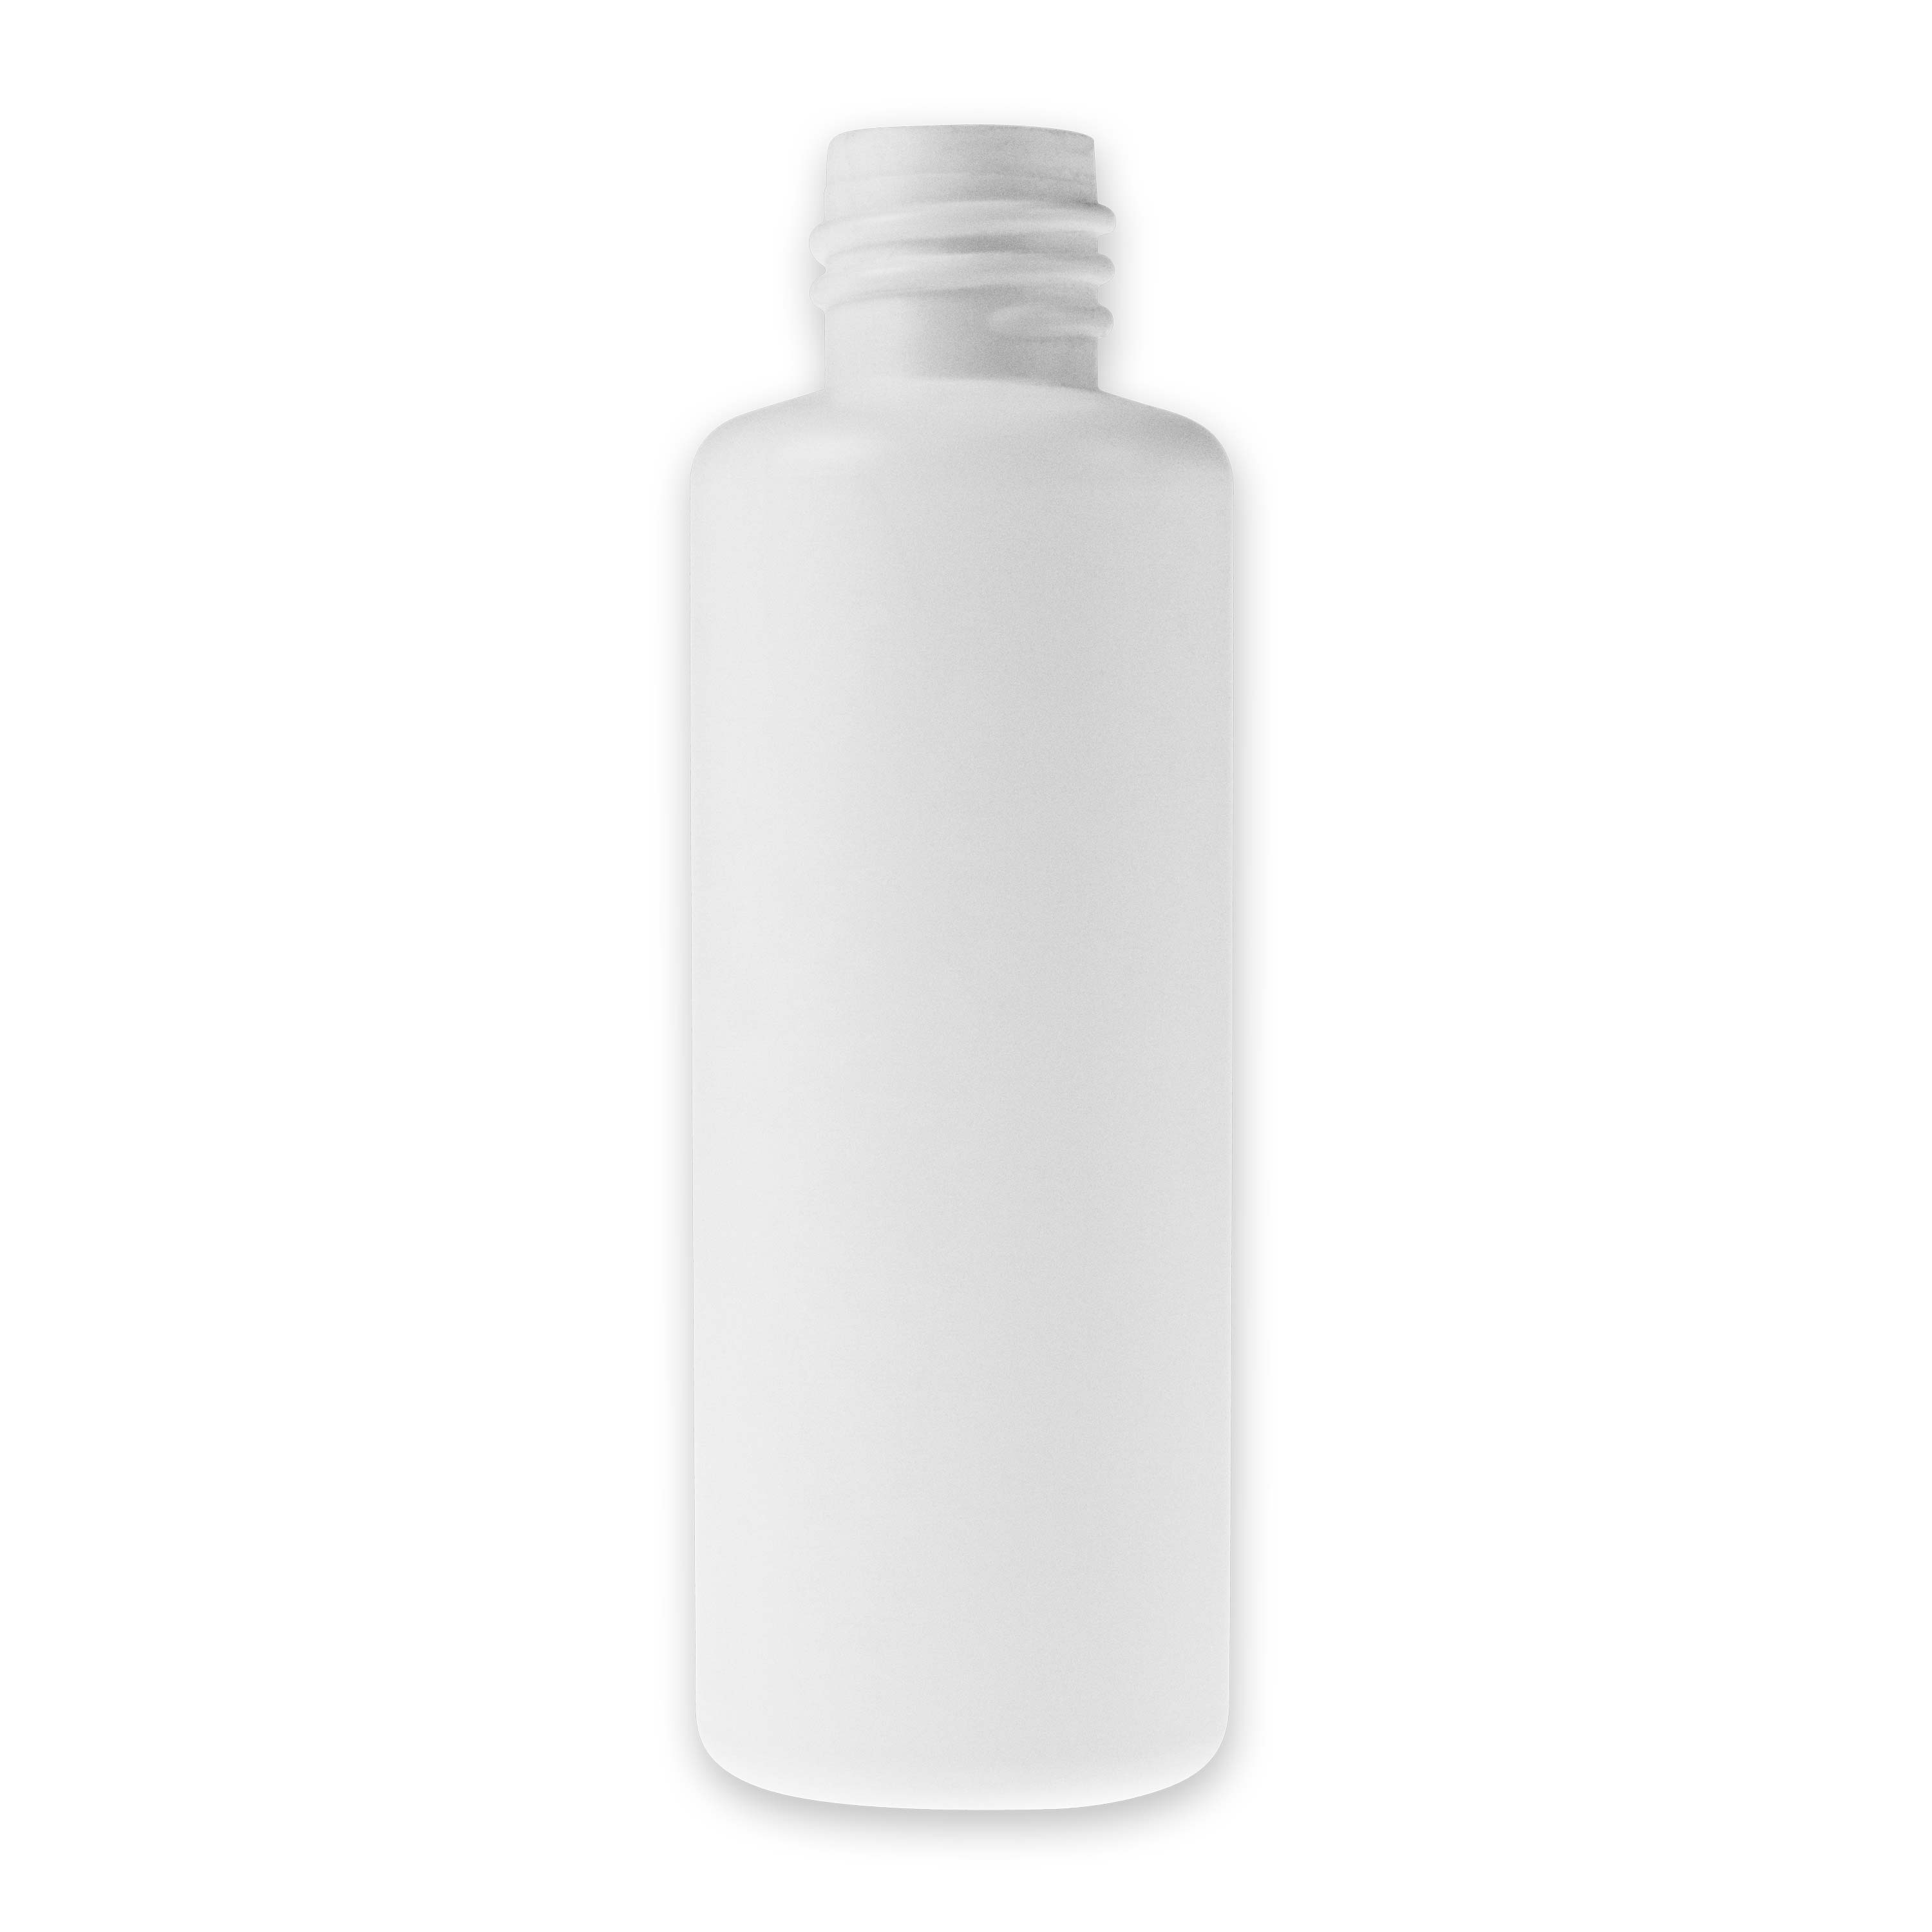 Cylindrical round bottle made of HDPE white 50 ml